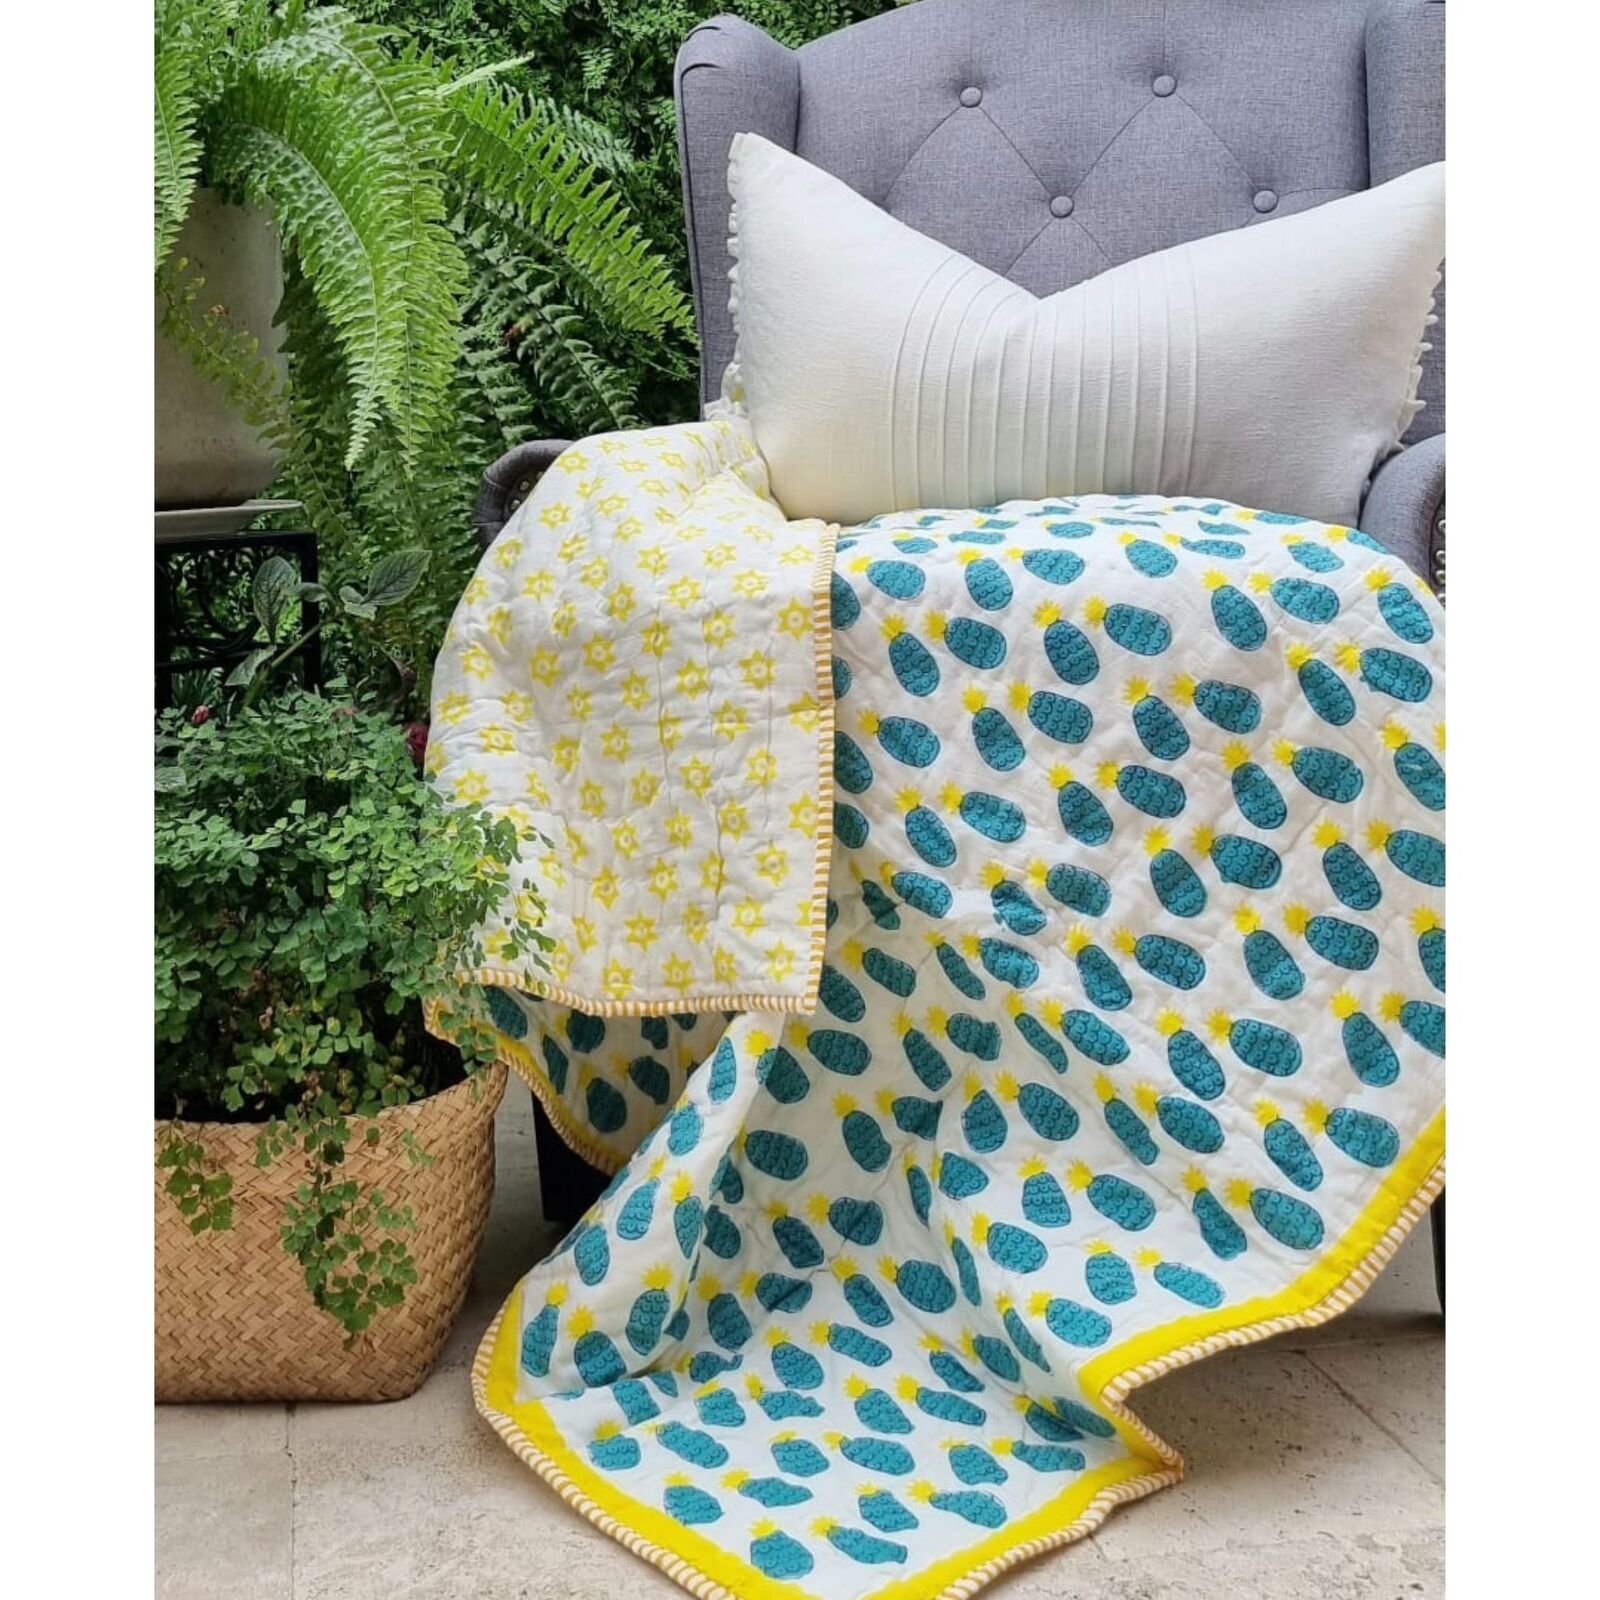 GOTS Certified Organic Cotton Reversible Baby Quilt (100x120cm) - Blue Pineapple - SILBERSHELL